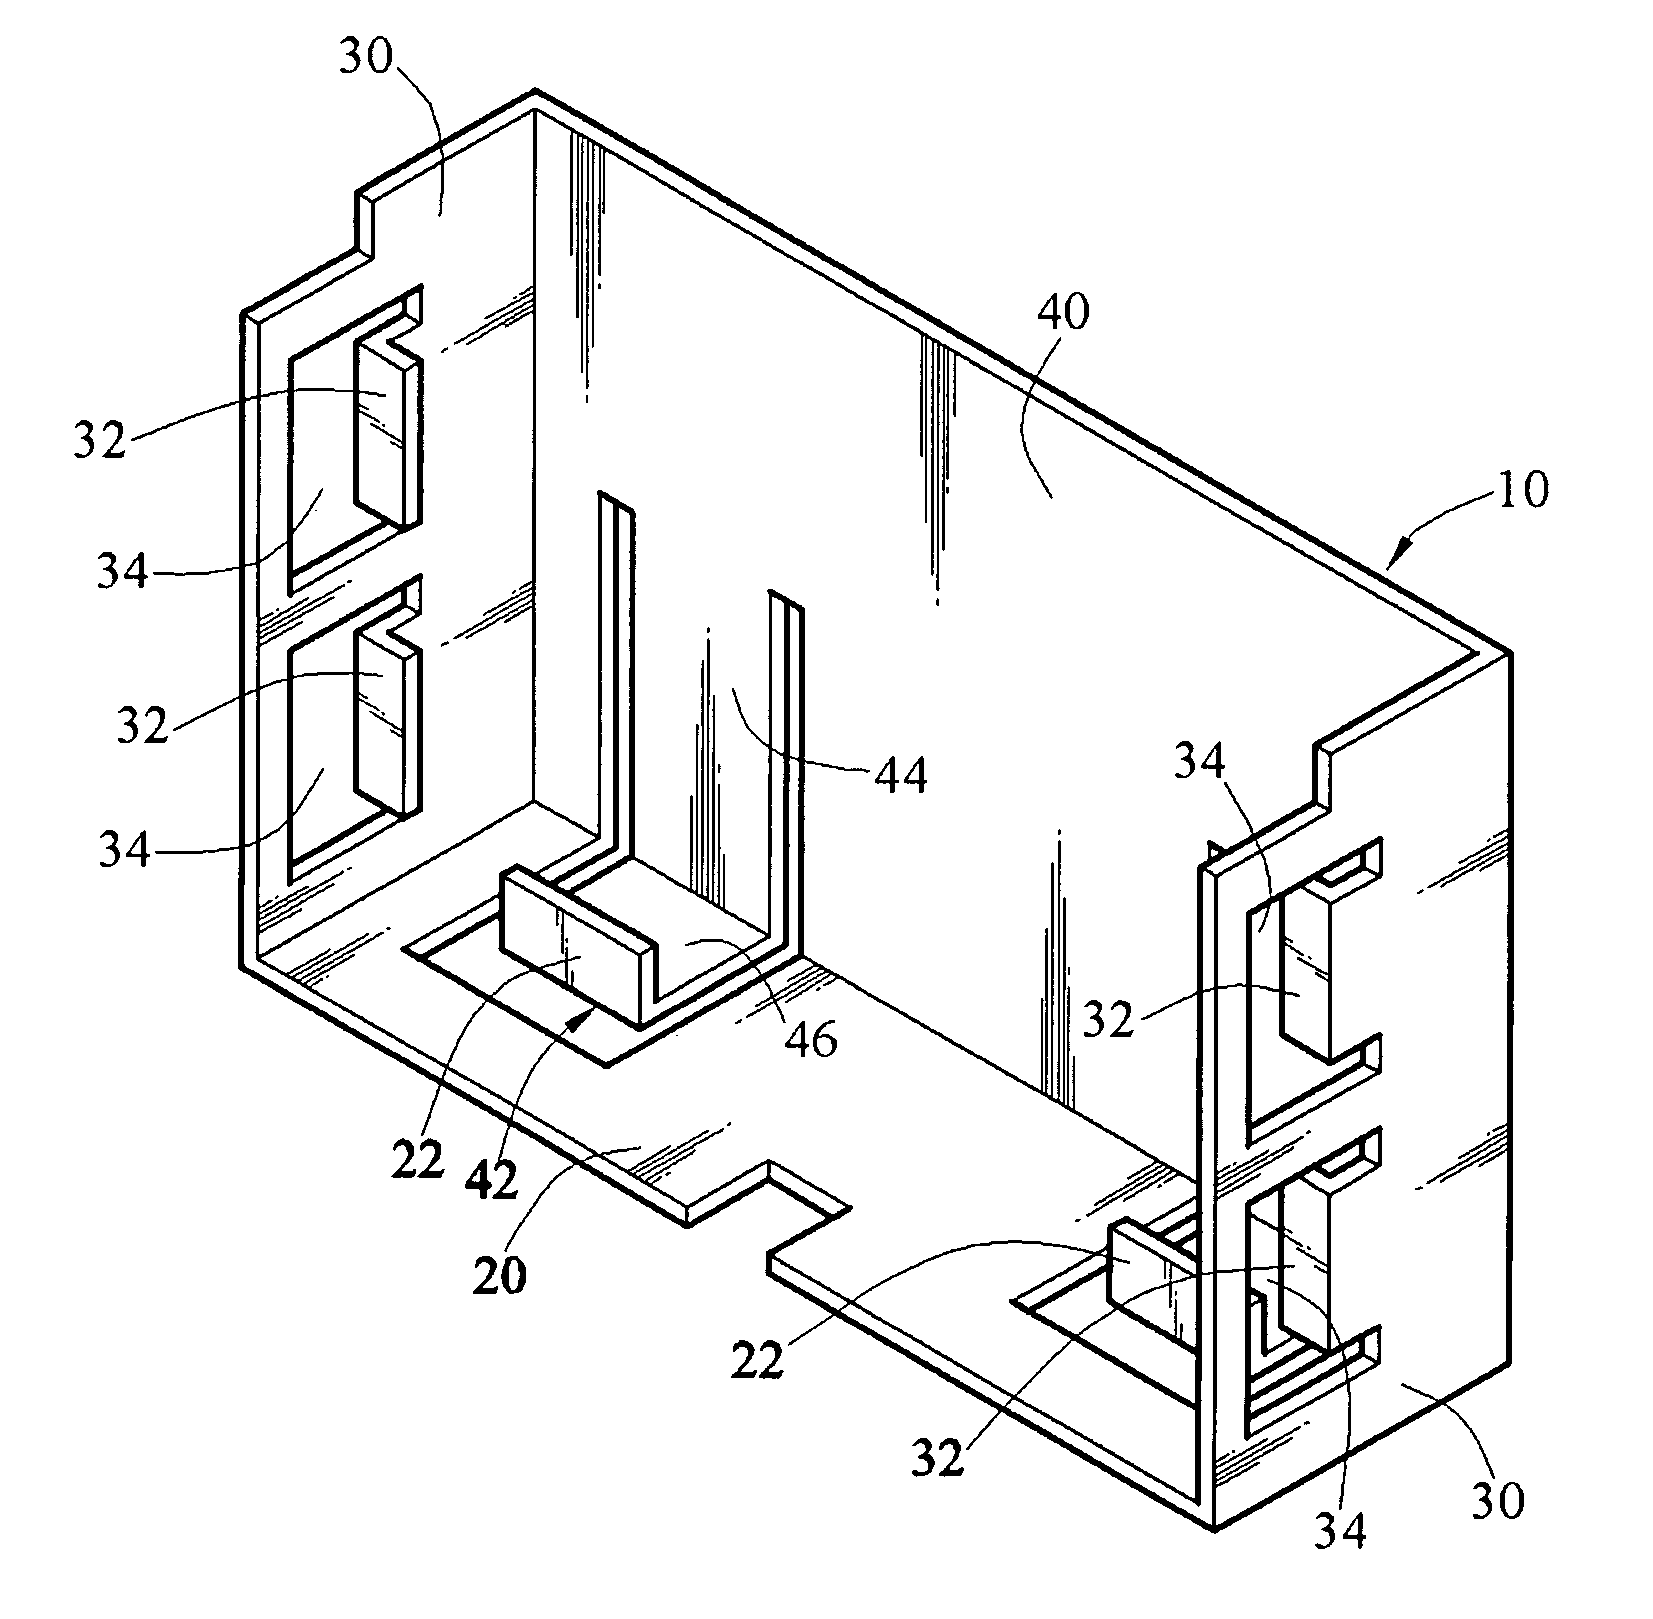 Device for retaining a printed circuit board